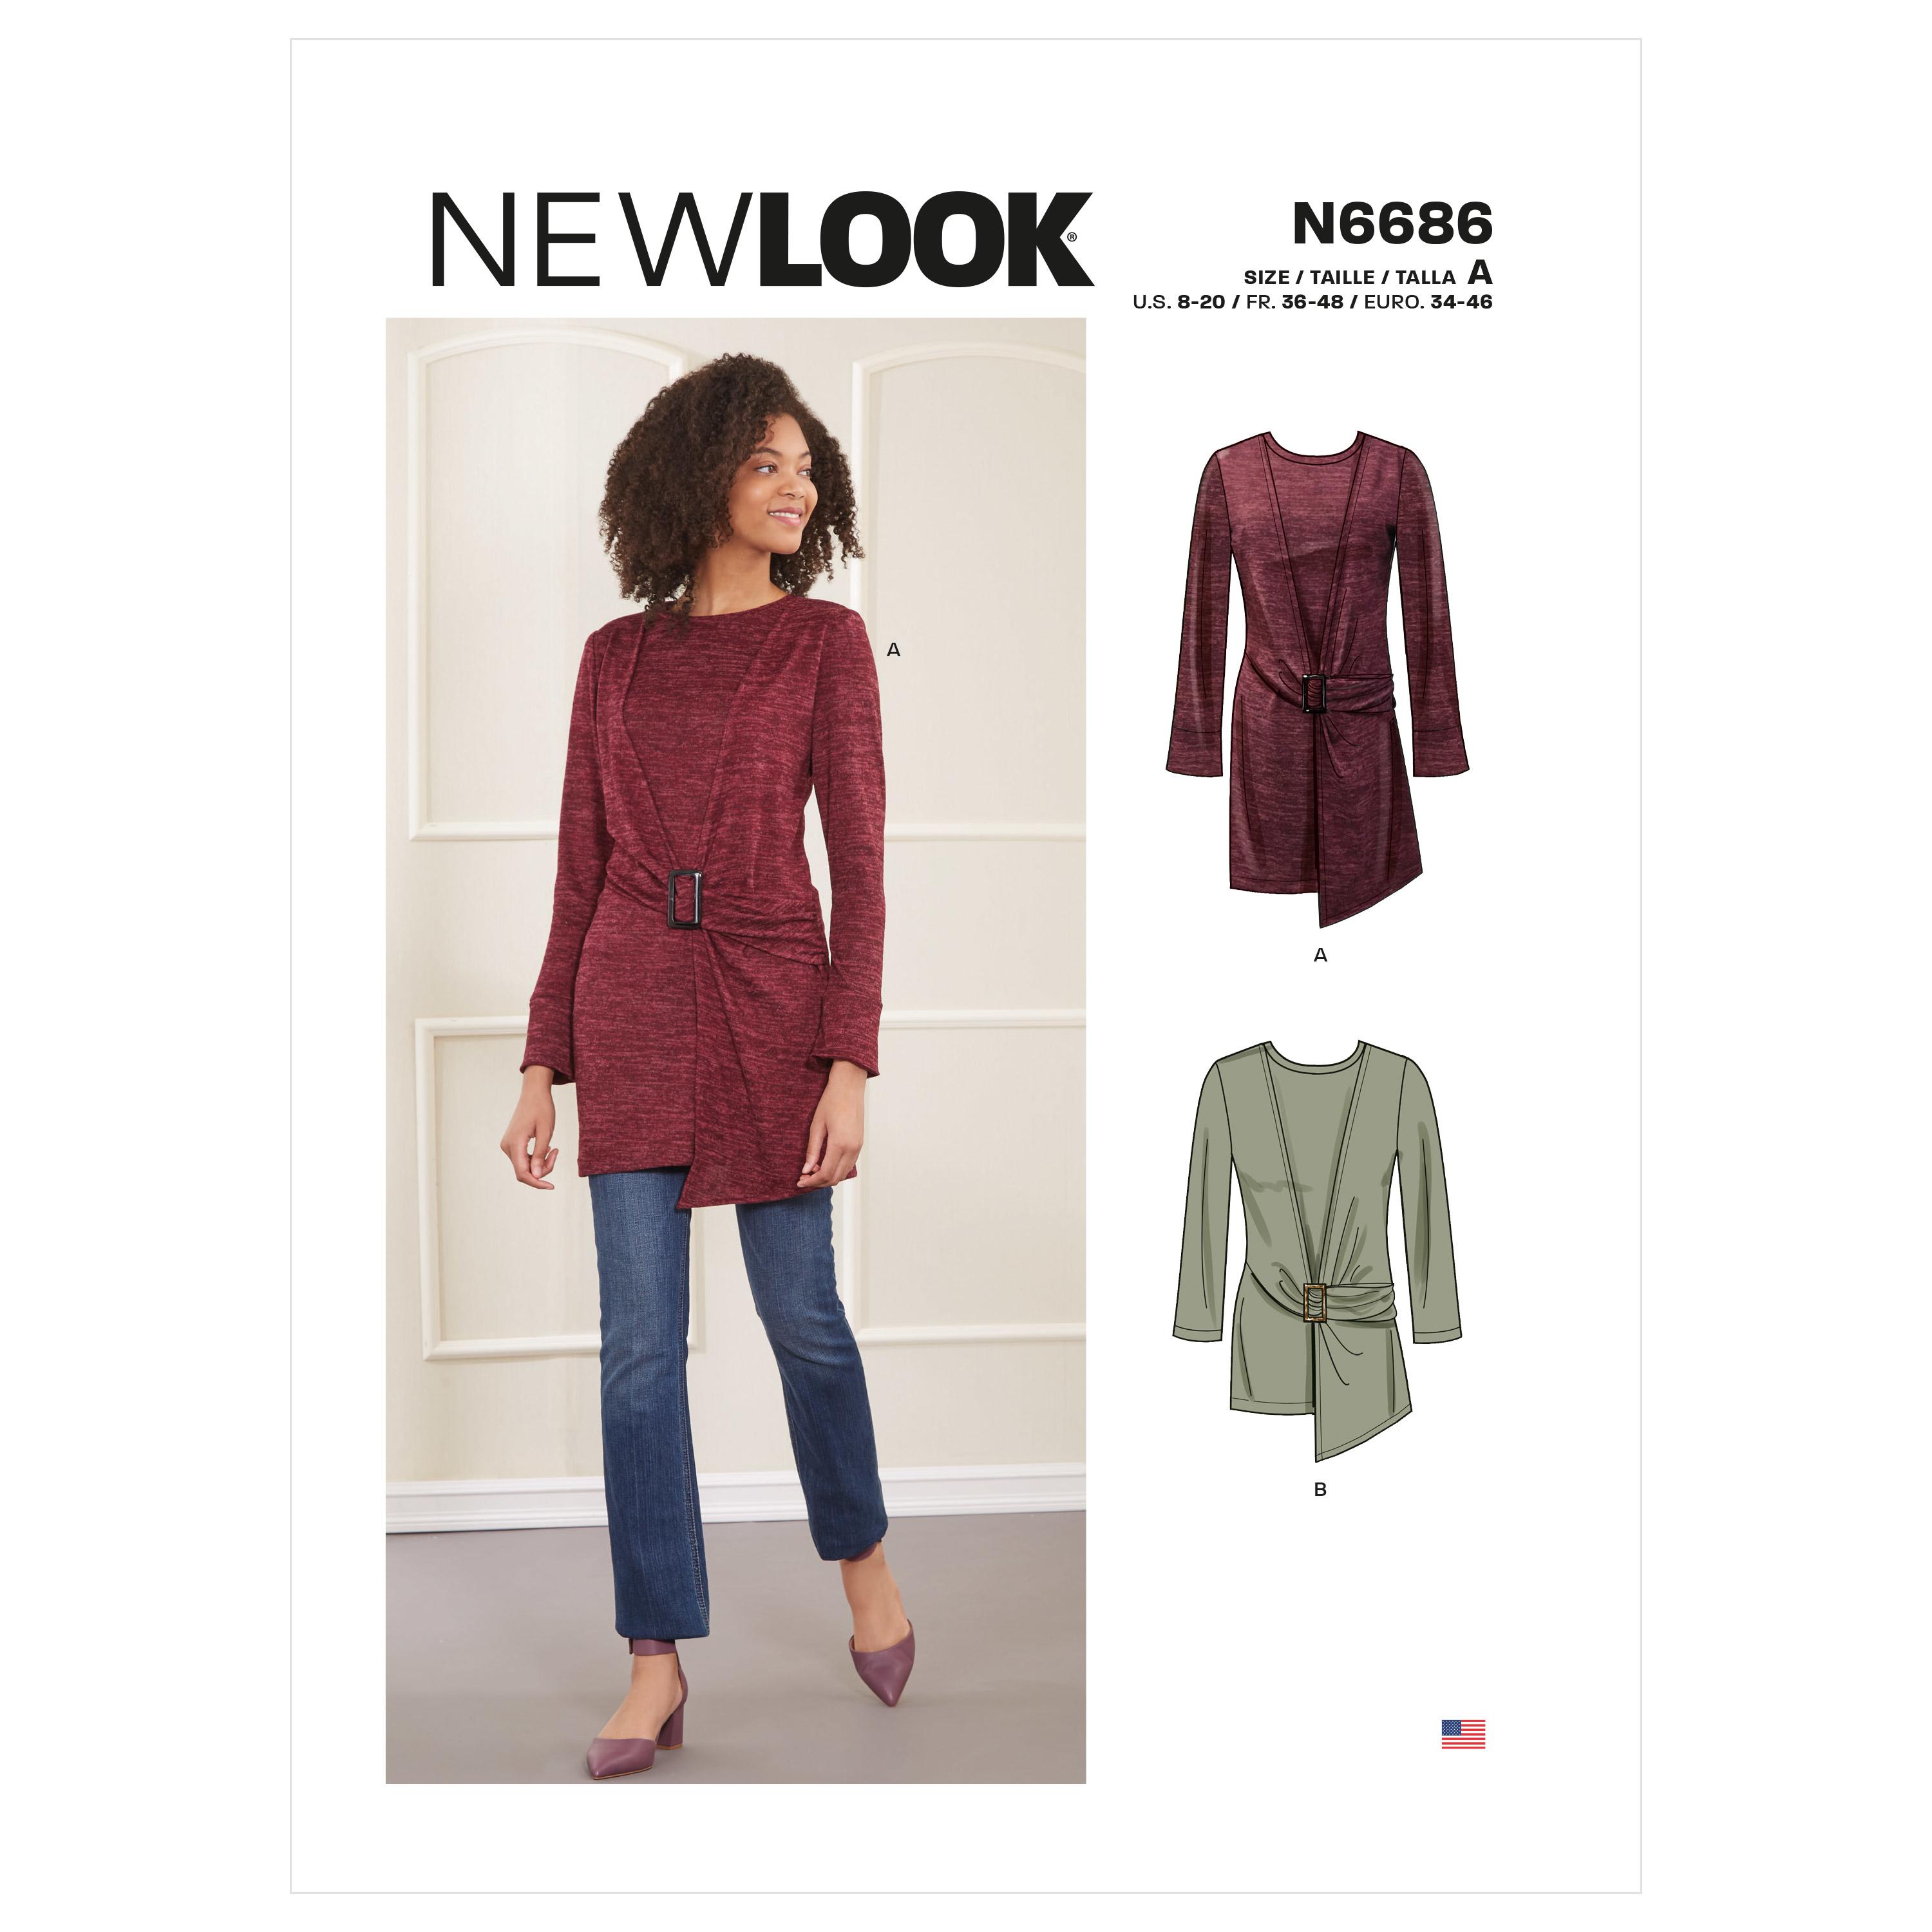 New Look Sewing Pattern N6686 Misses' Knit Top In Two Lengths